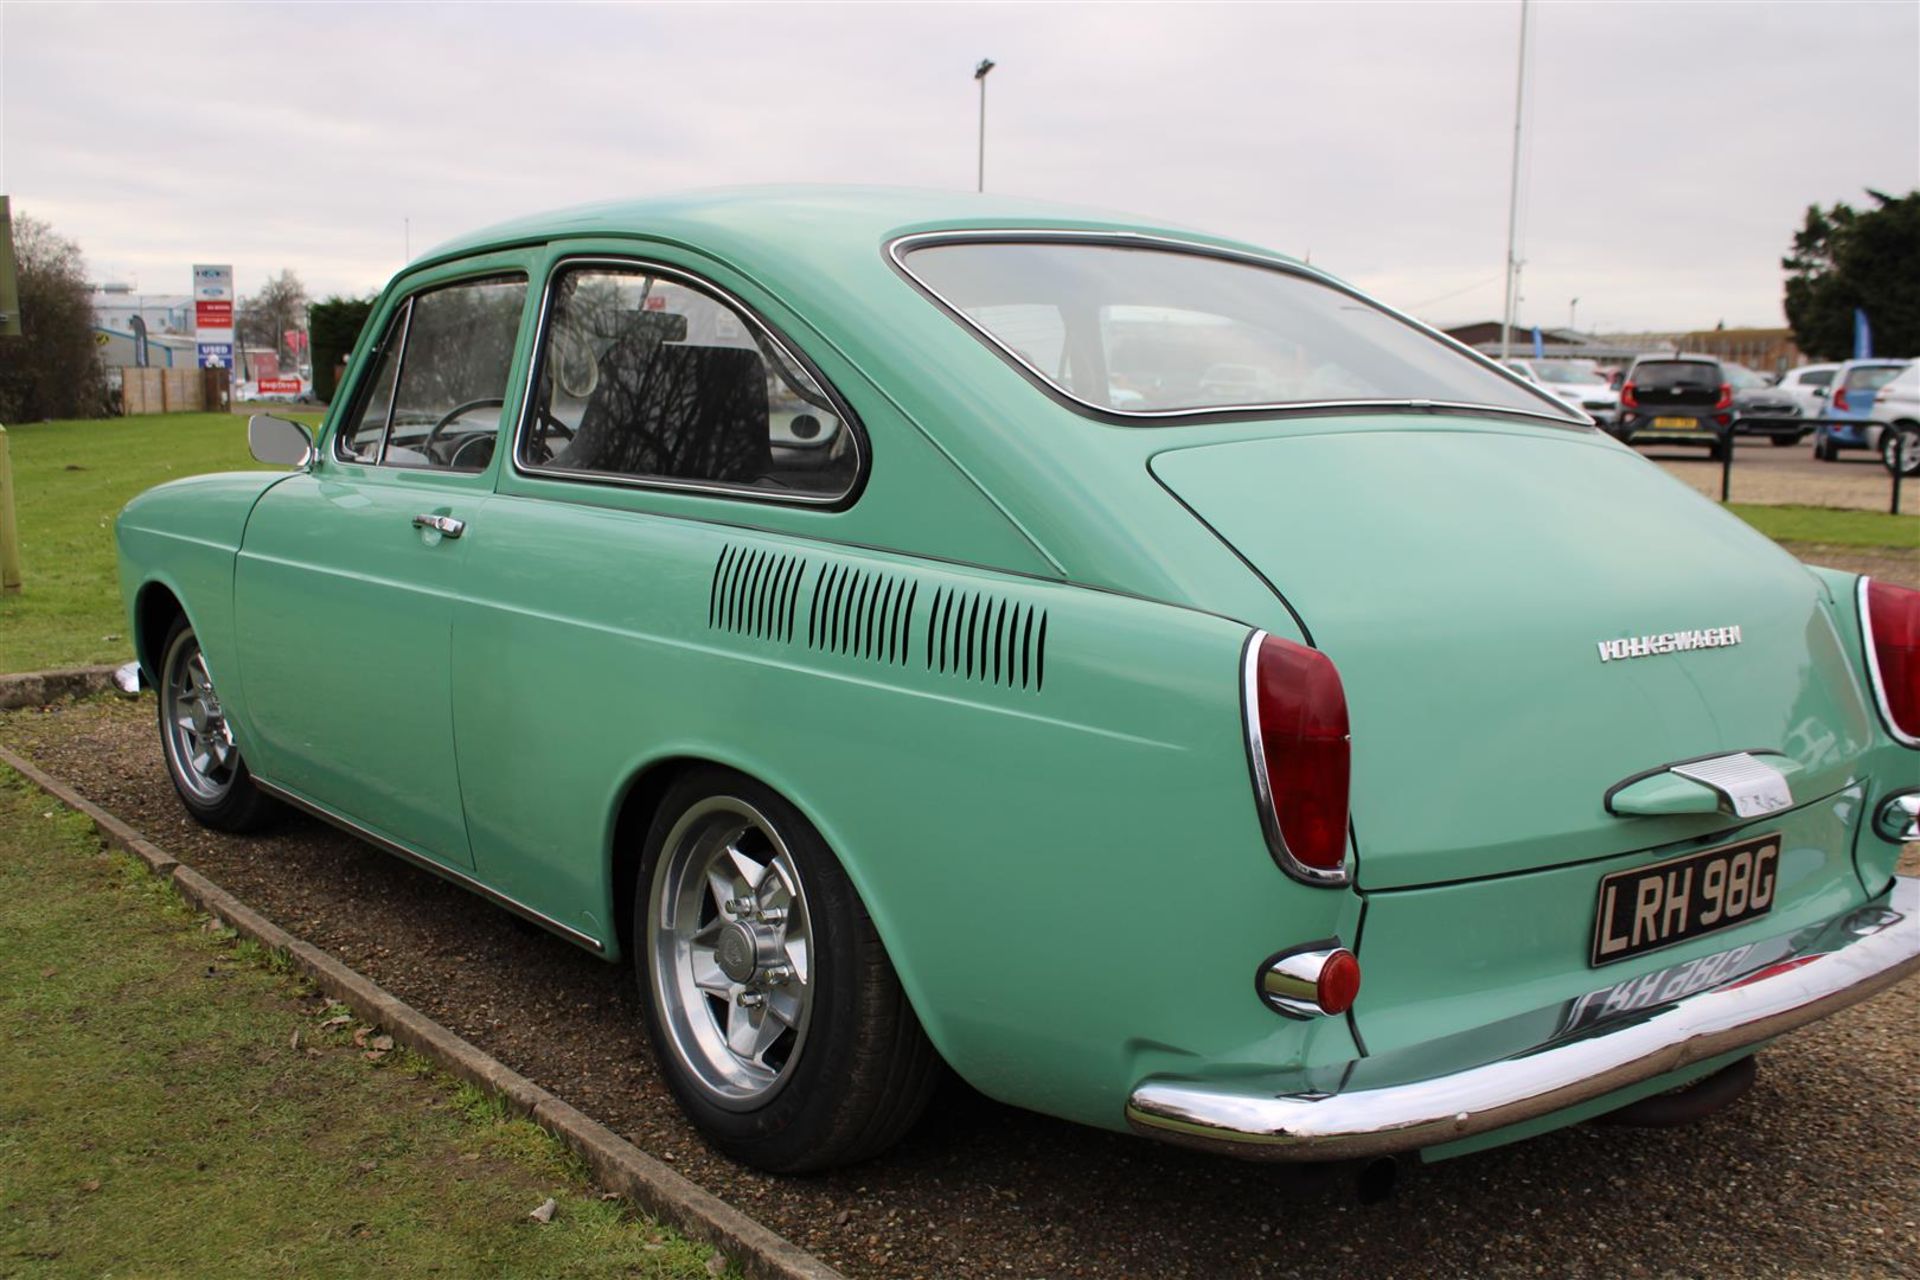 1969 VW Fastback 1600 Coupe LHD - Image 10 of 18